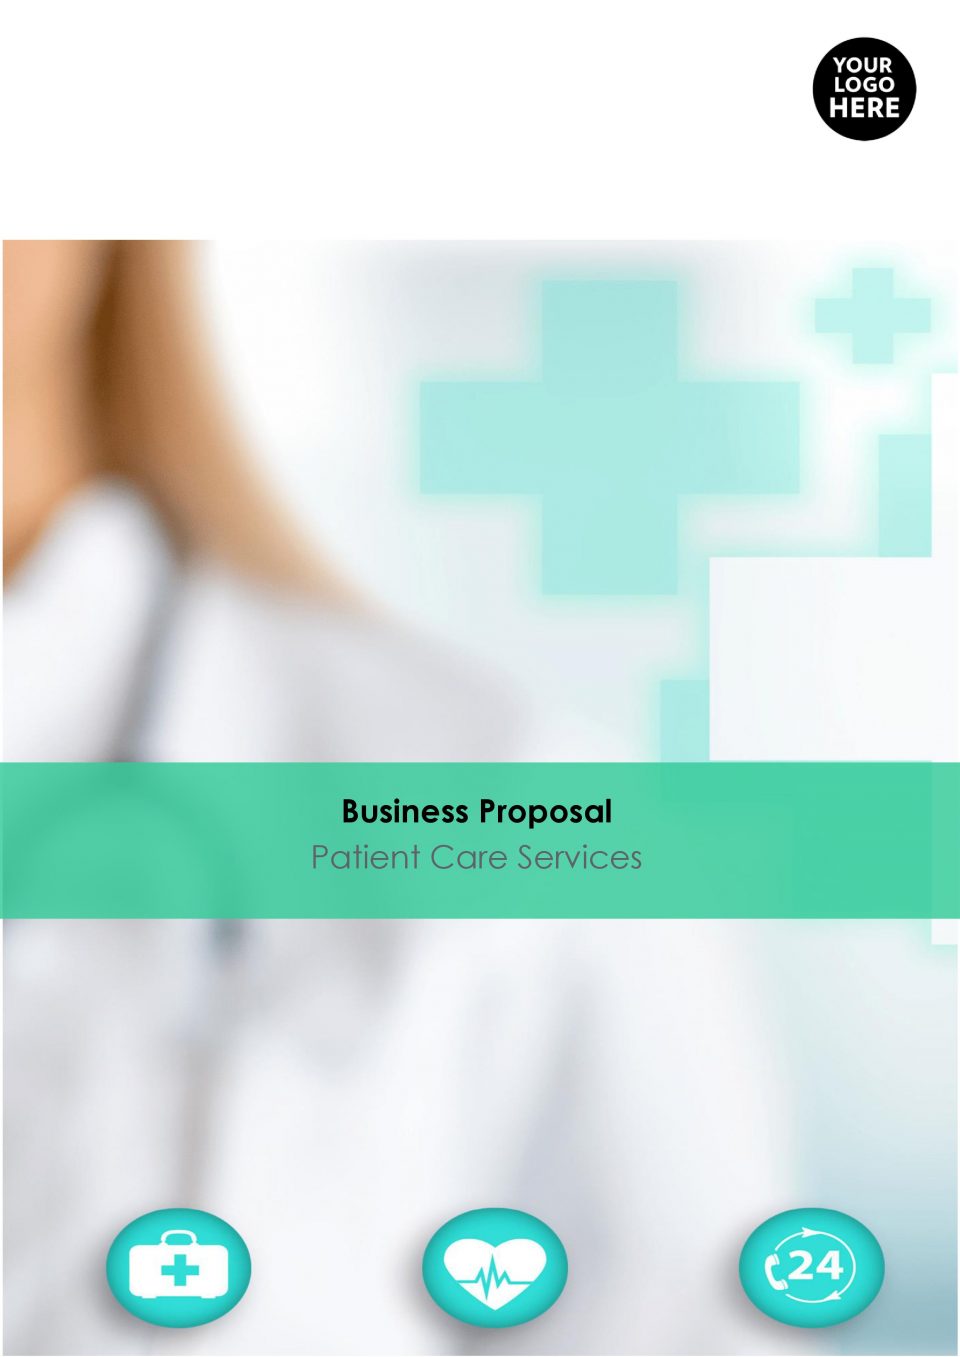 Business Proposal template for PATIENT CARE SERVICES 01 scaled